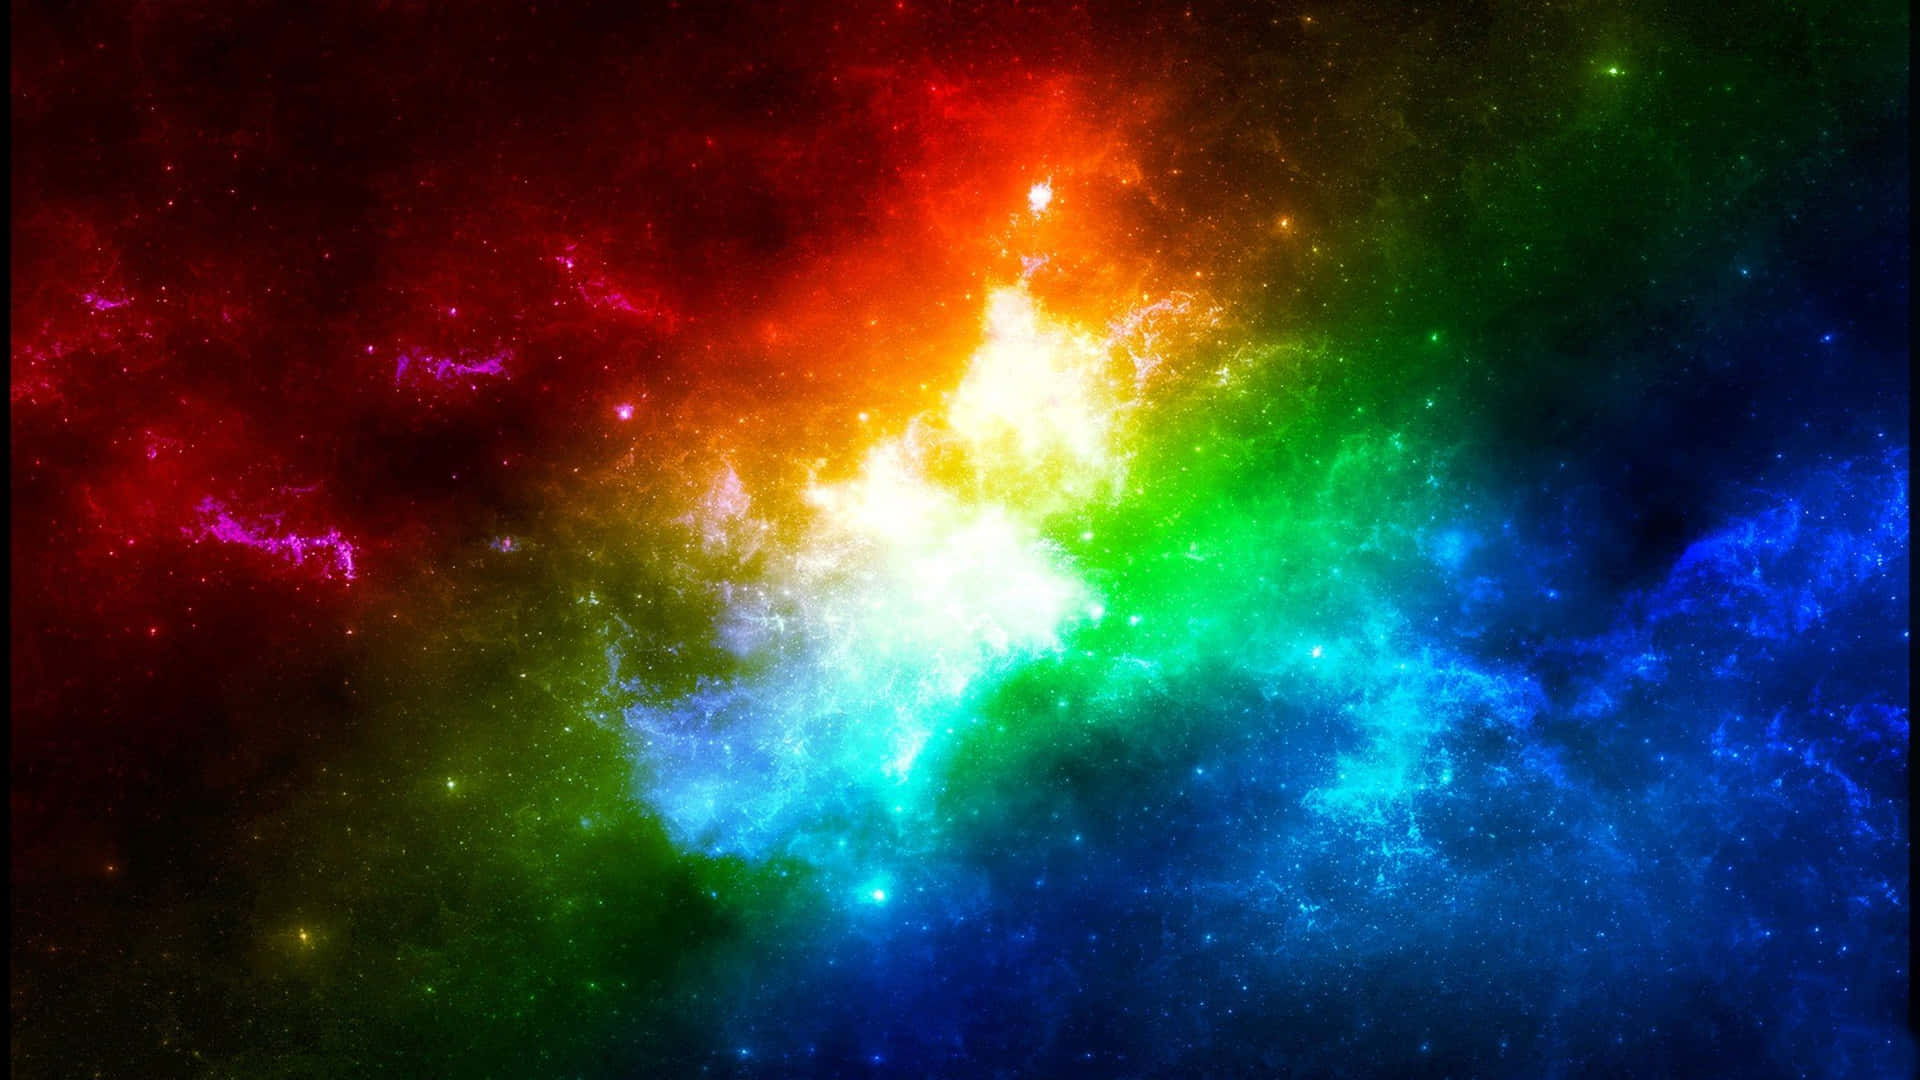 Colorful Galaxy 2048x1152 Pixel Background